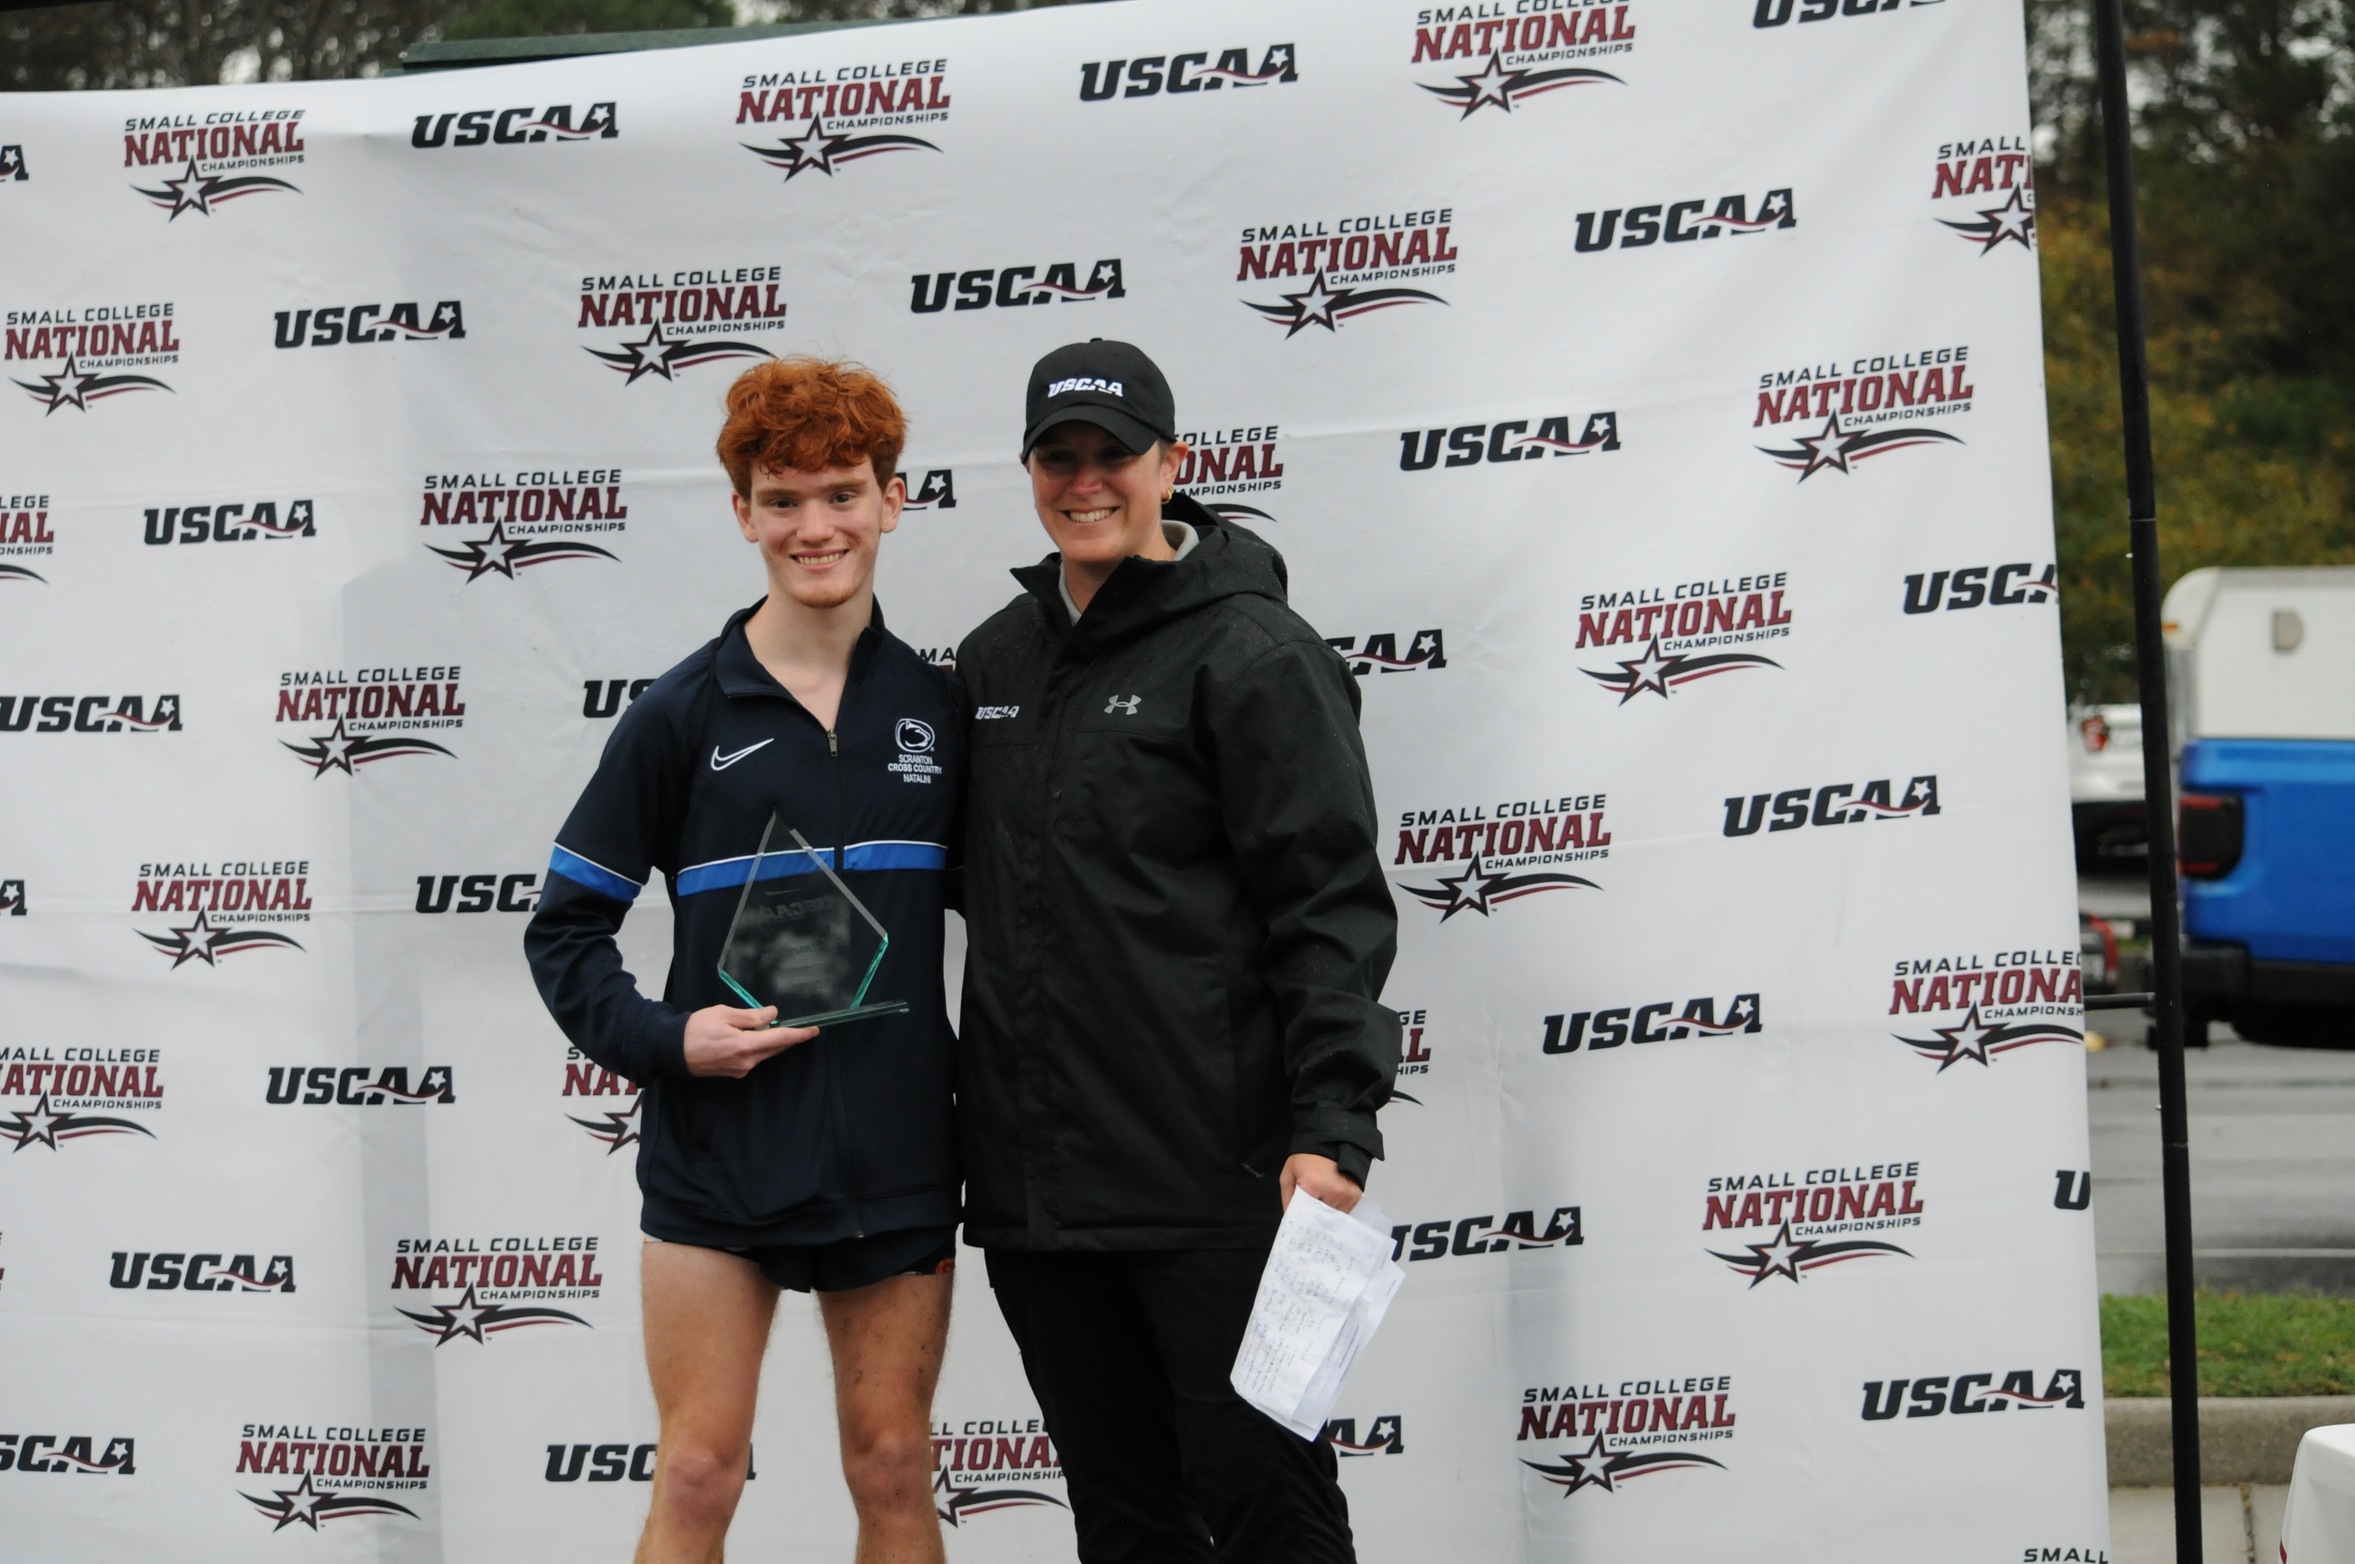 Natalini earns 1st Team All American at USCAA National Championships